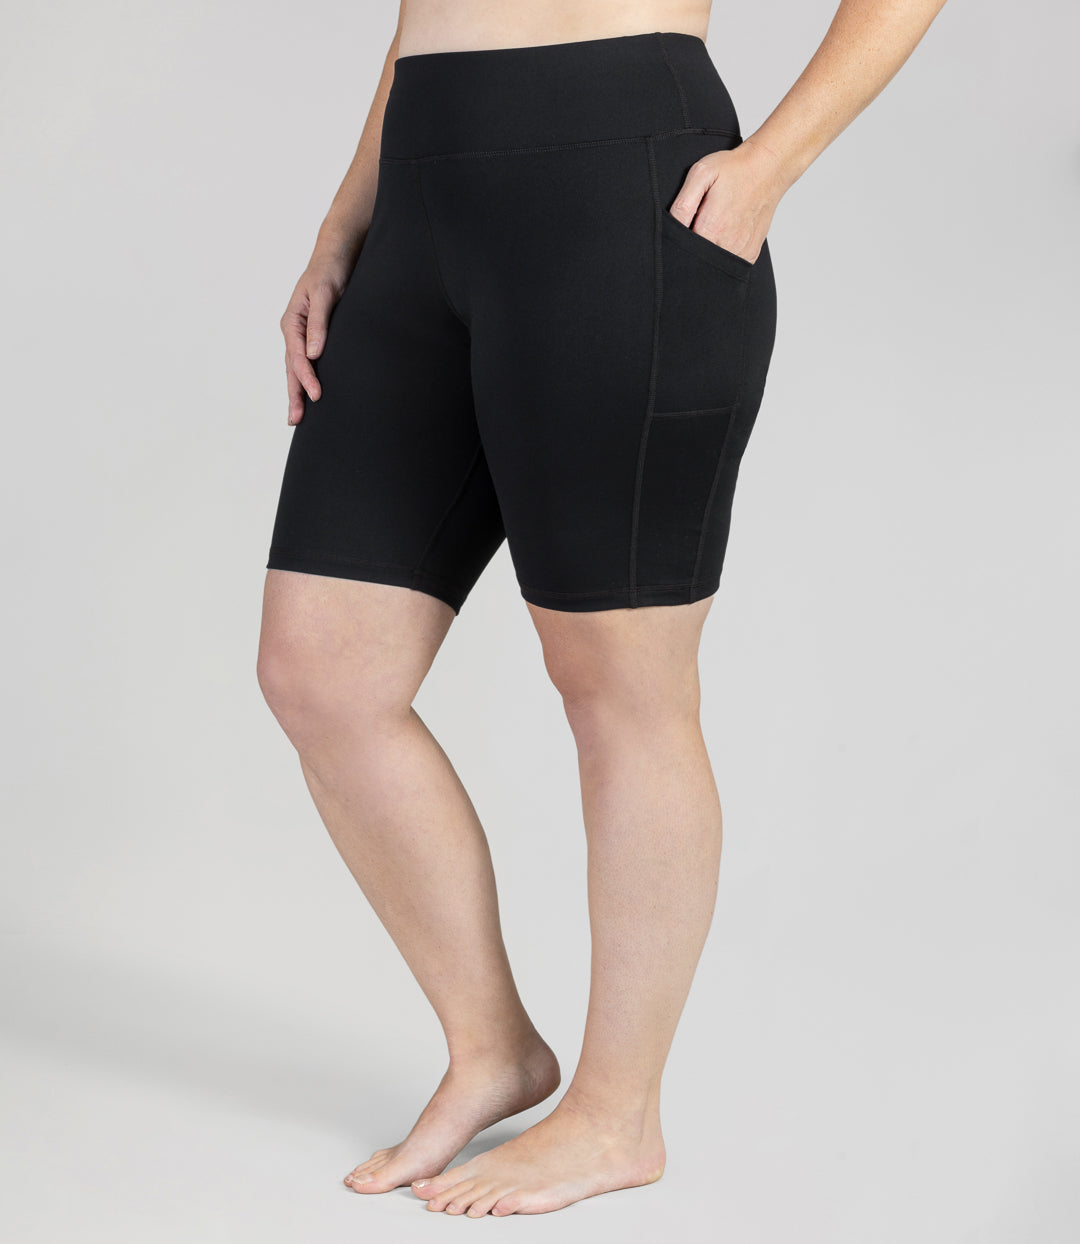 Plus size woman, front view, wearing JunoActive JunoStretch Side Pocket Short in black. The hem is a few inches above the knee.